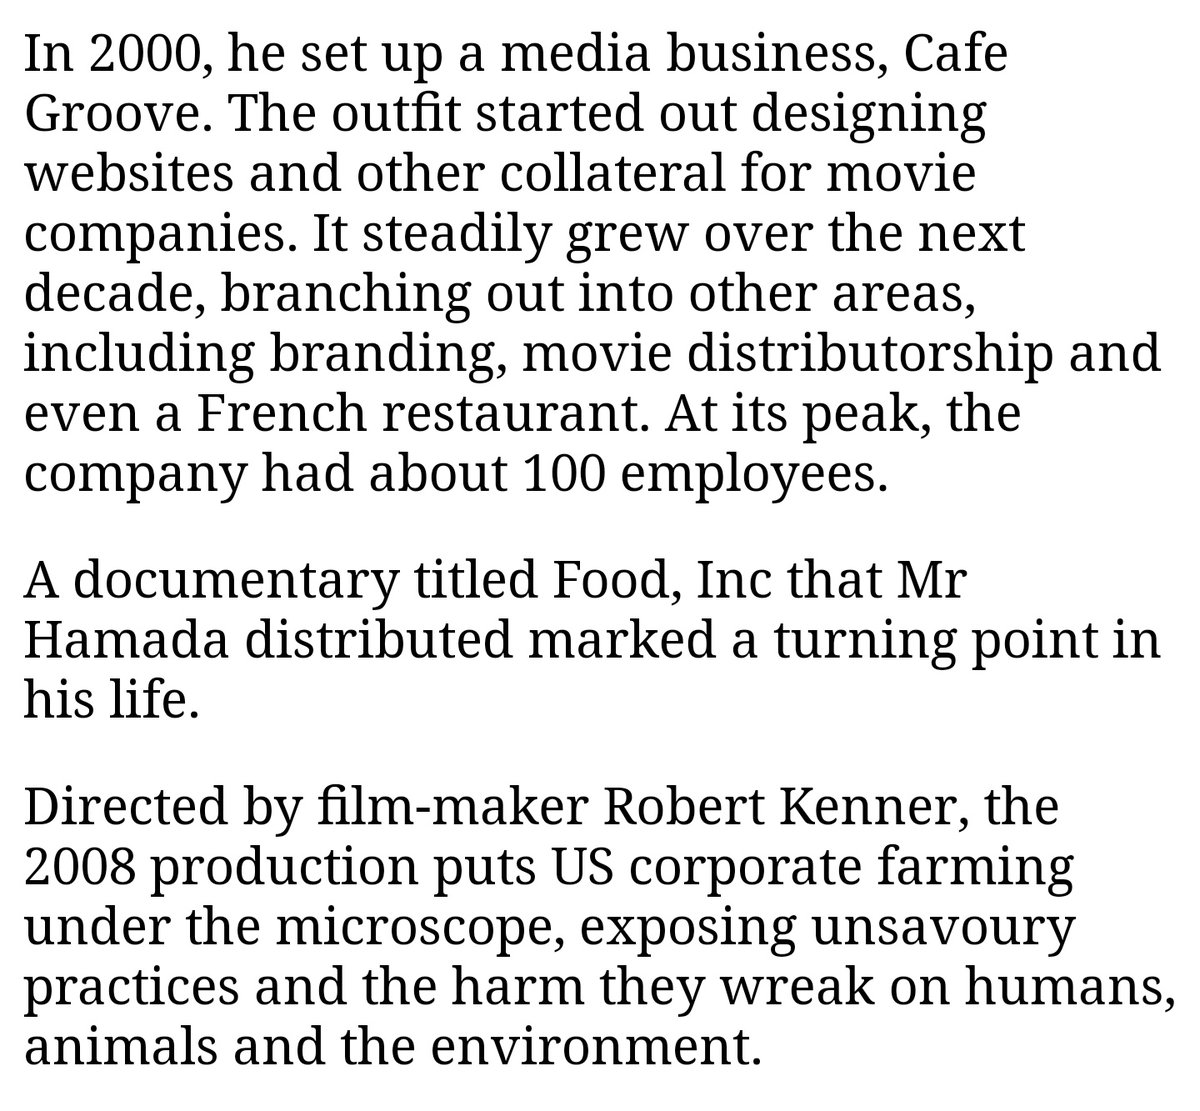 Interestingly, Hamada used to be in the movie industry, even distributing Food Inc. Wonder how much that informed his optimisation for engagement